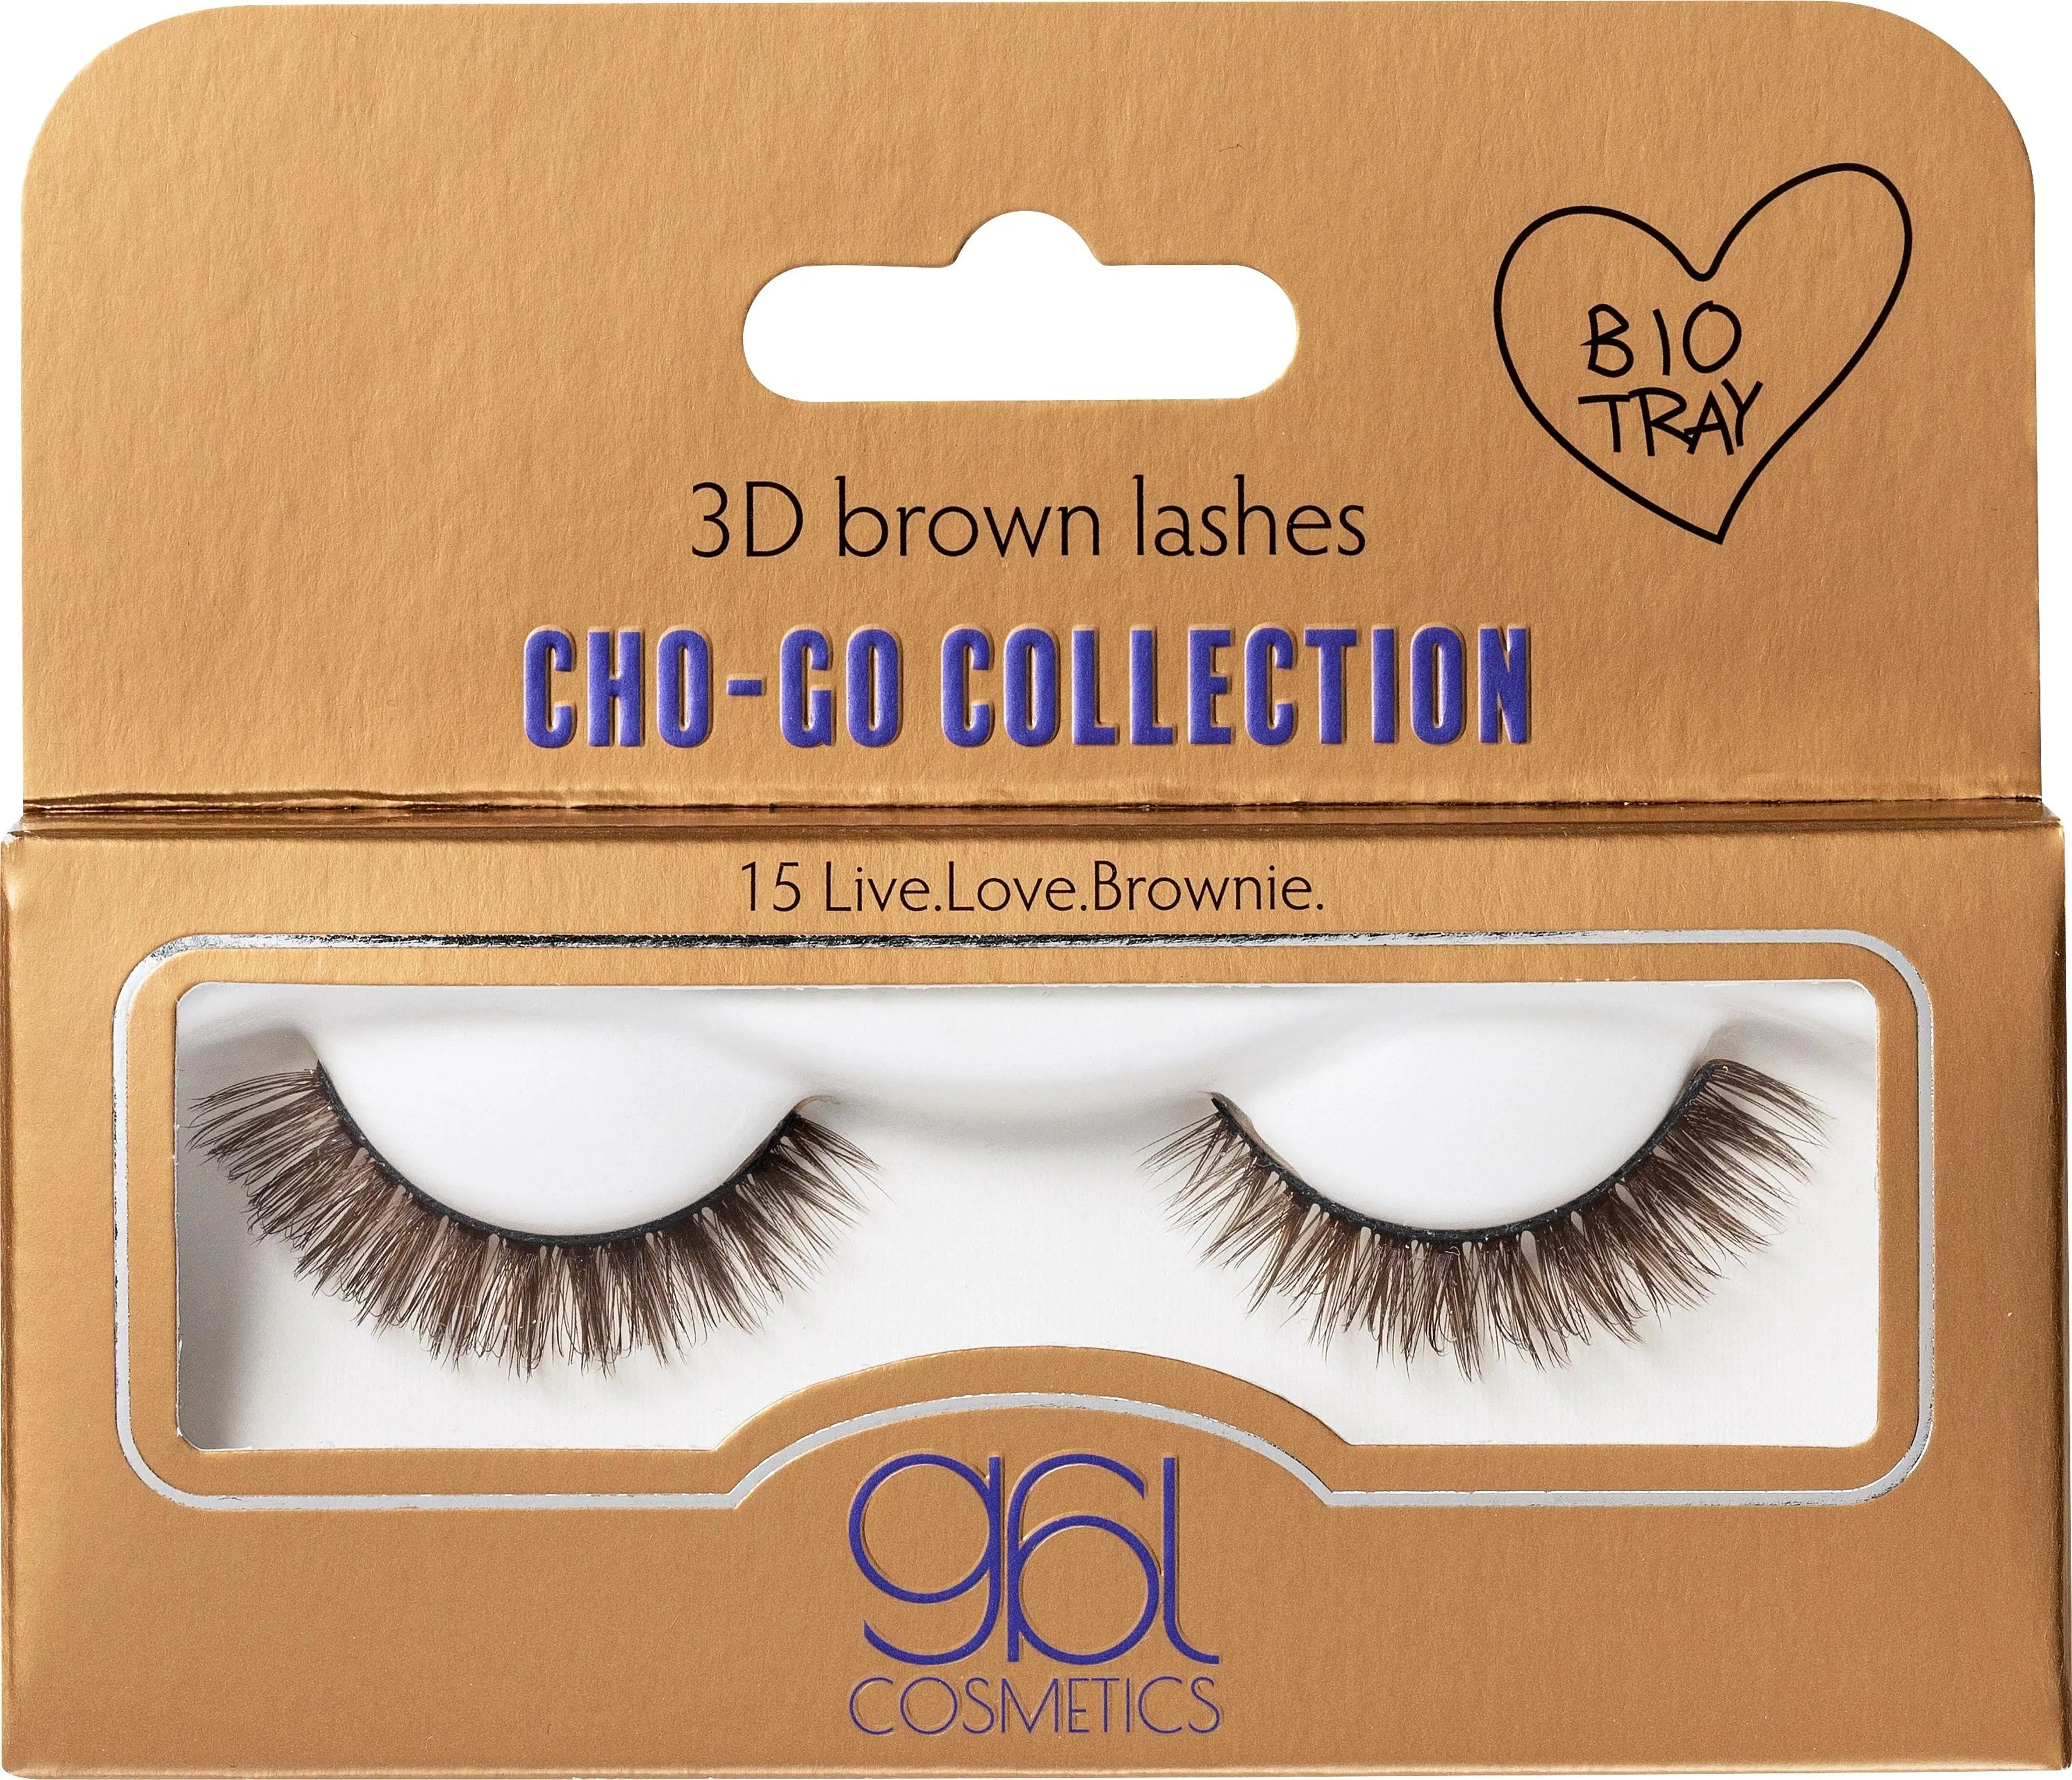 GBL Cosmetics Cho-go Collection 15 Live.Love.Brownie. irtoripset